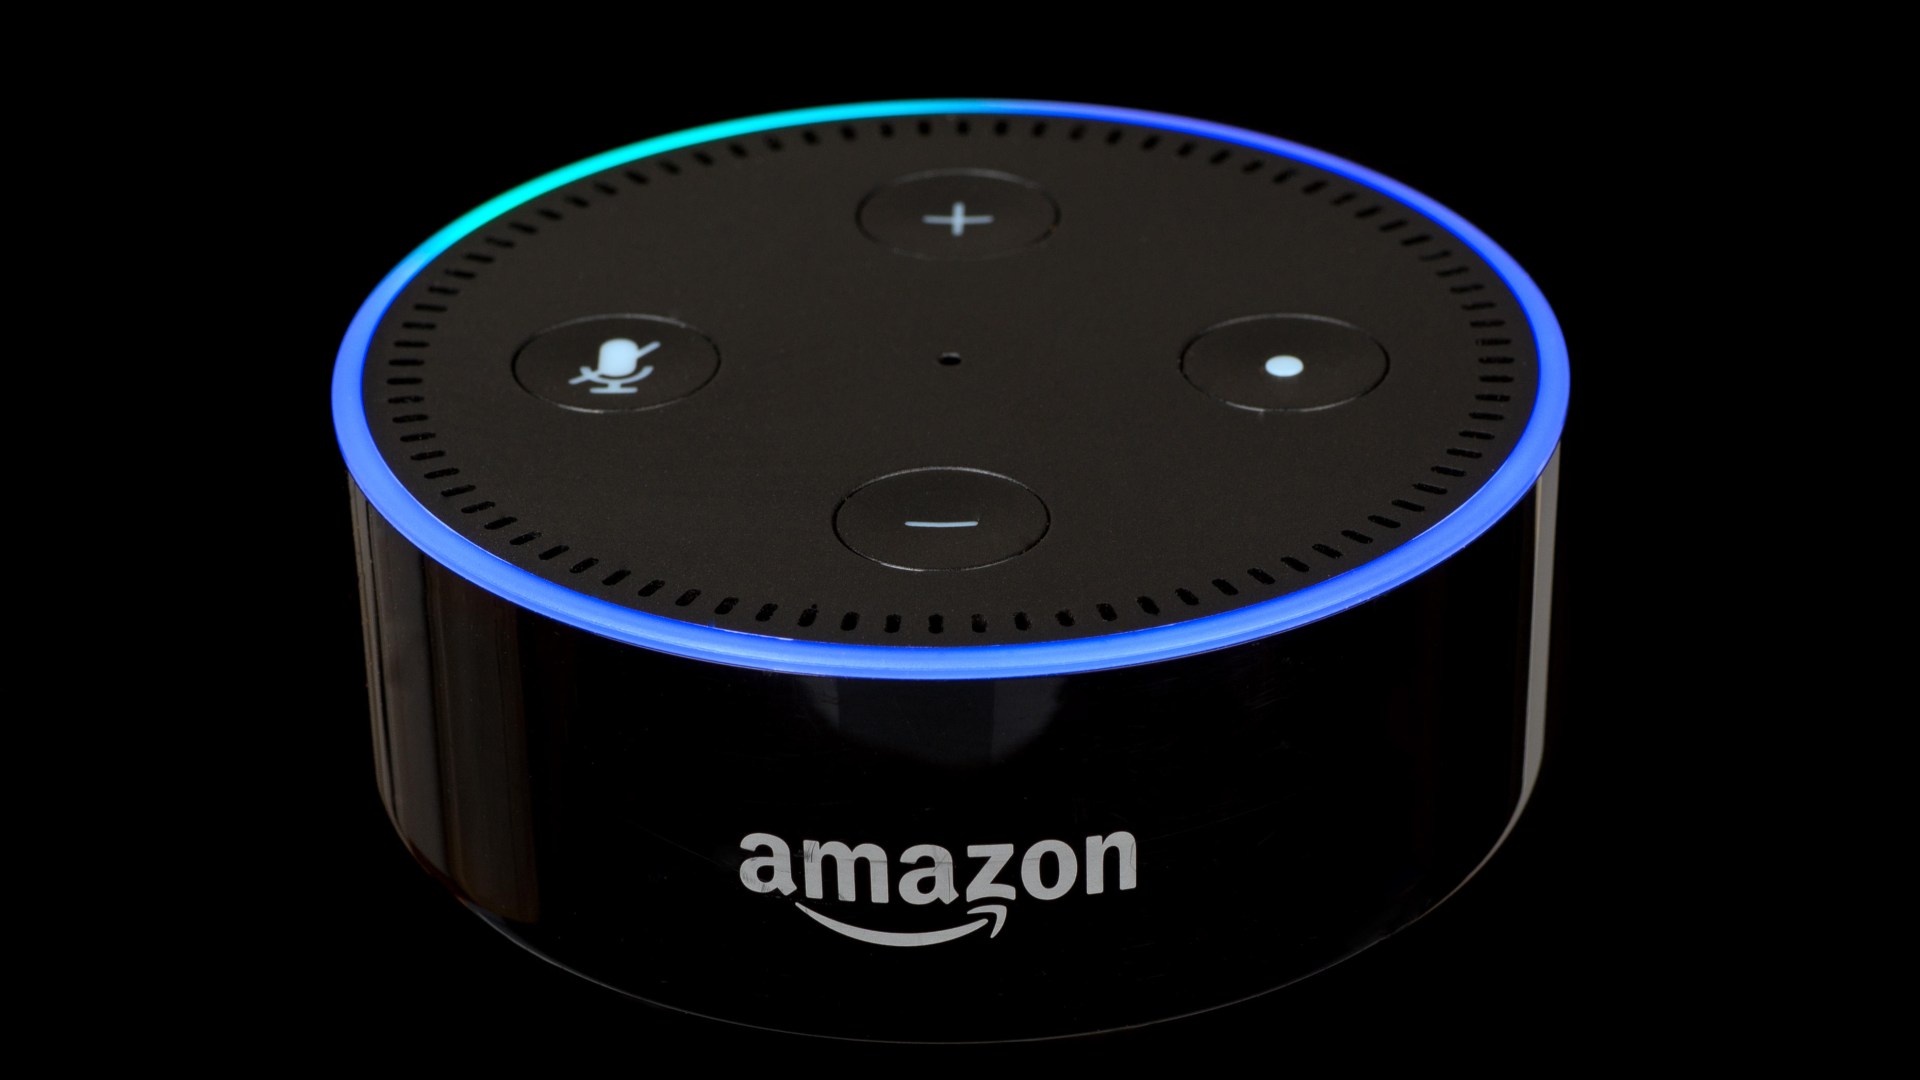 Outrage as Amazon plans to charge Alexa users for premium upgrades in the near future